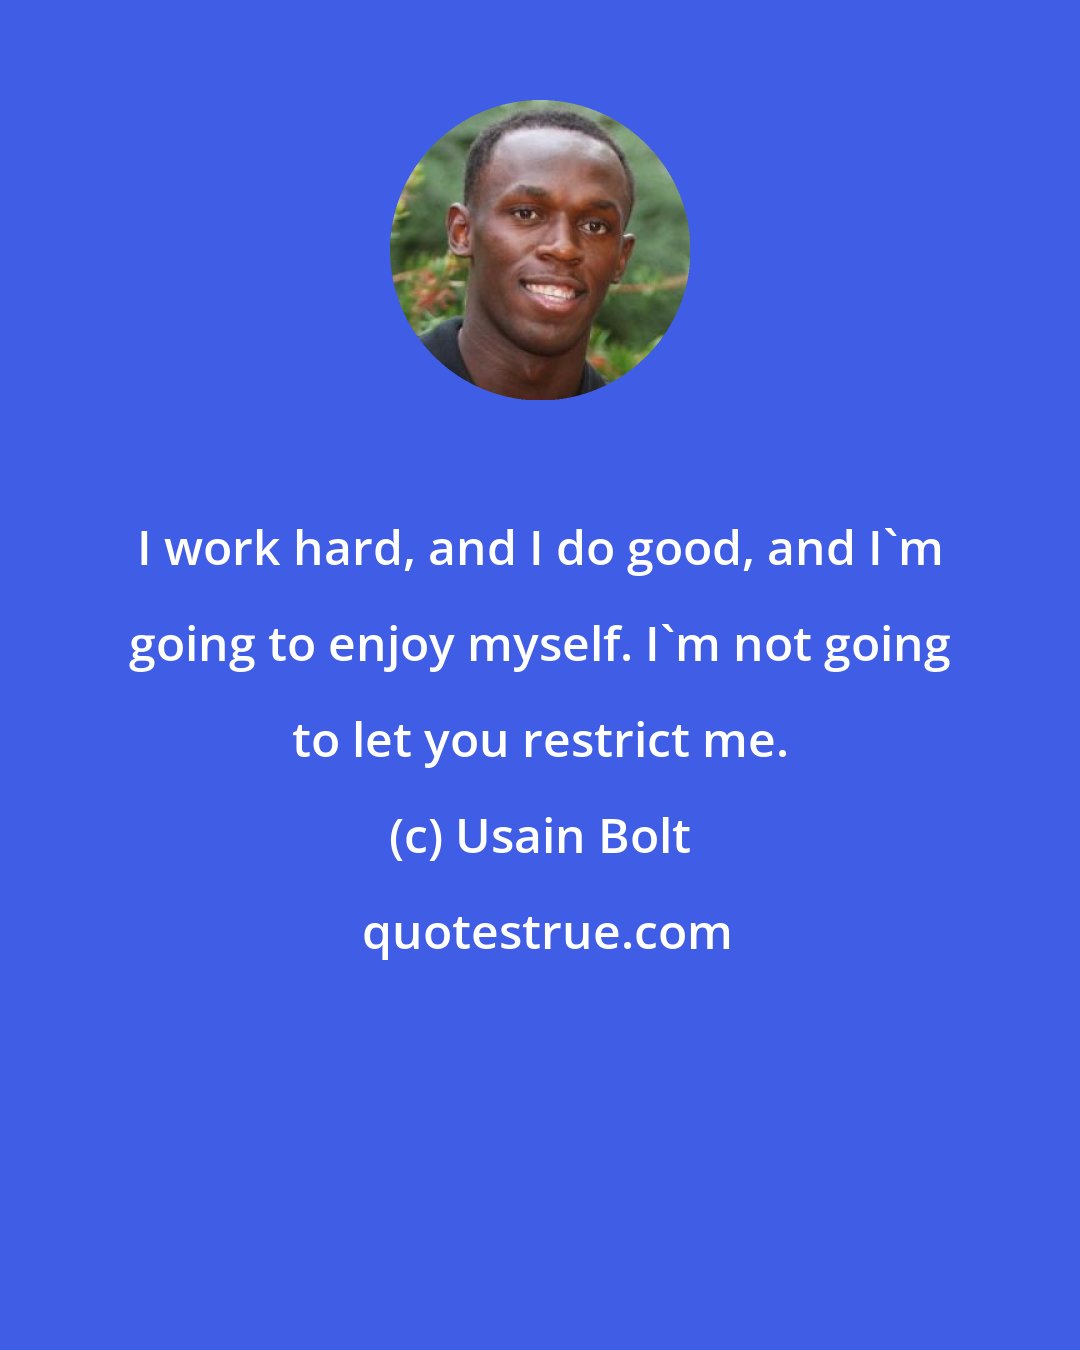 Usain Bolt: I work hard, and I do good, and I'm going to enjoy myself. I'm not going to let you restrict me.